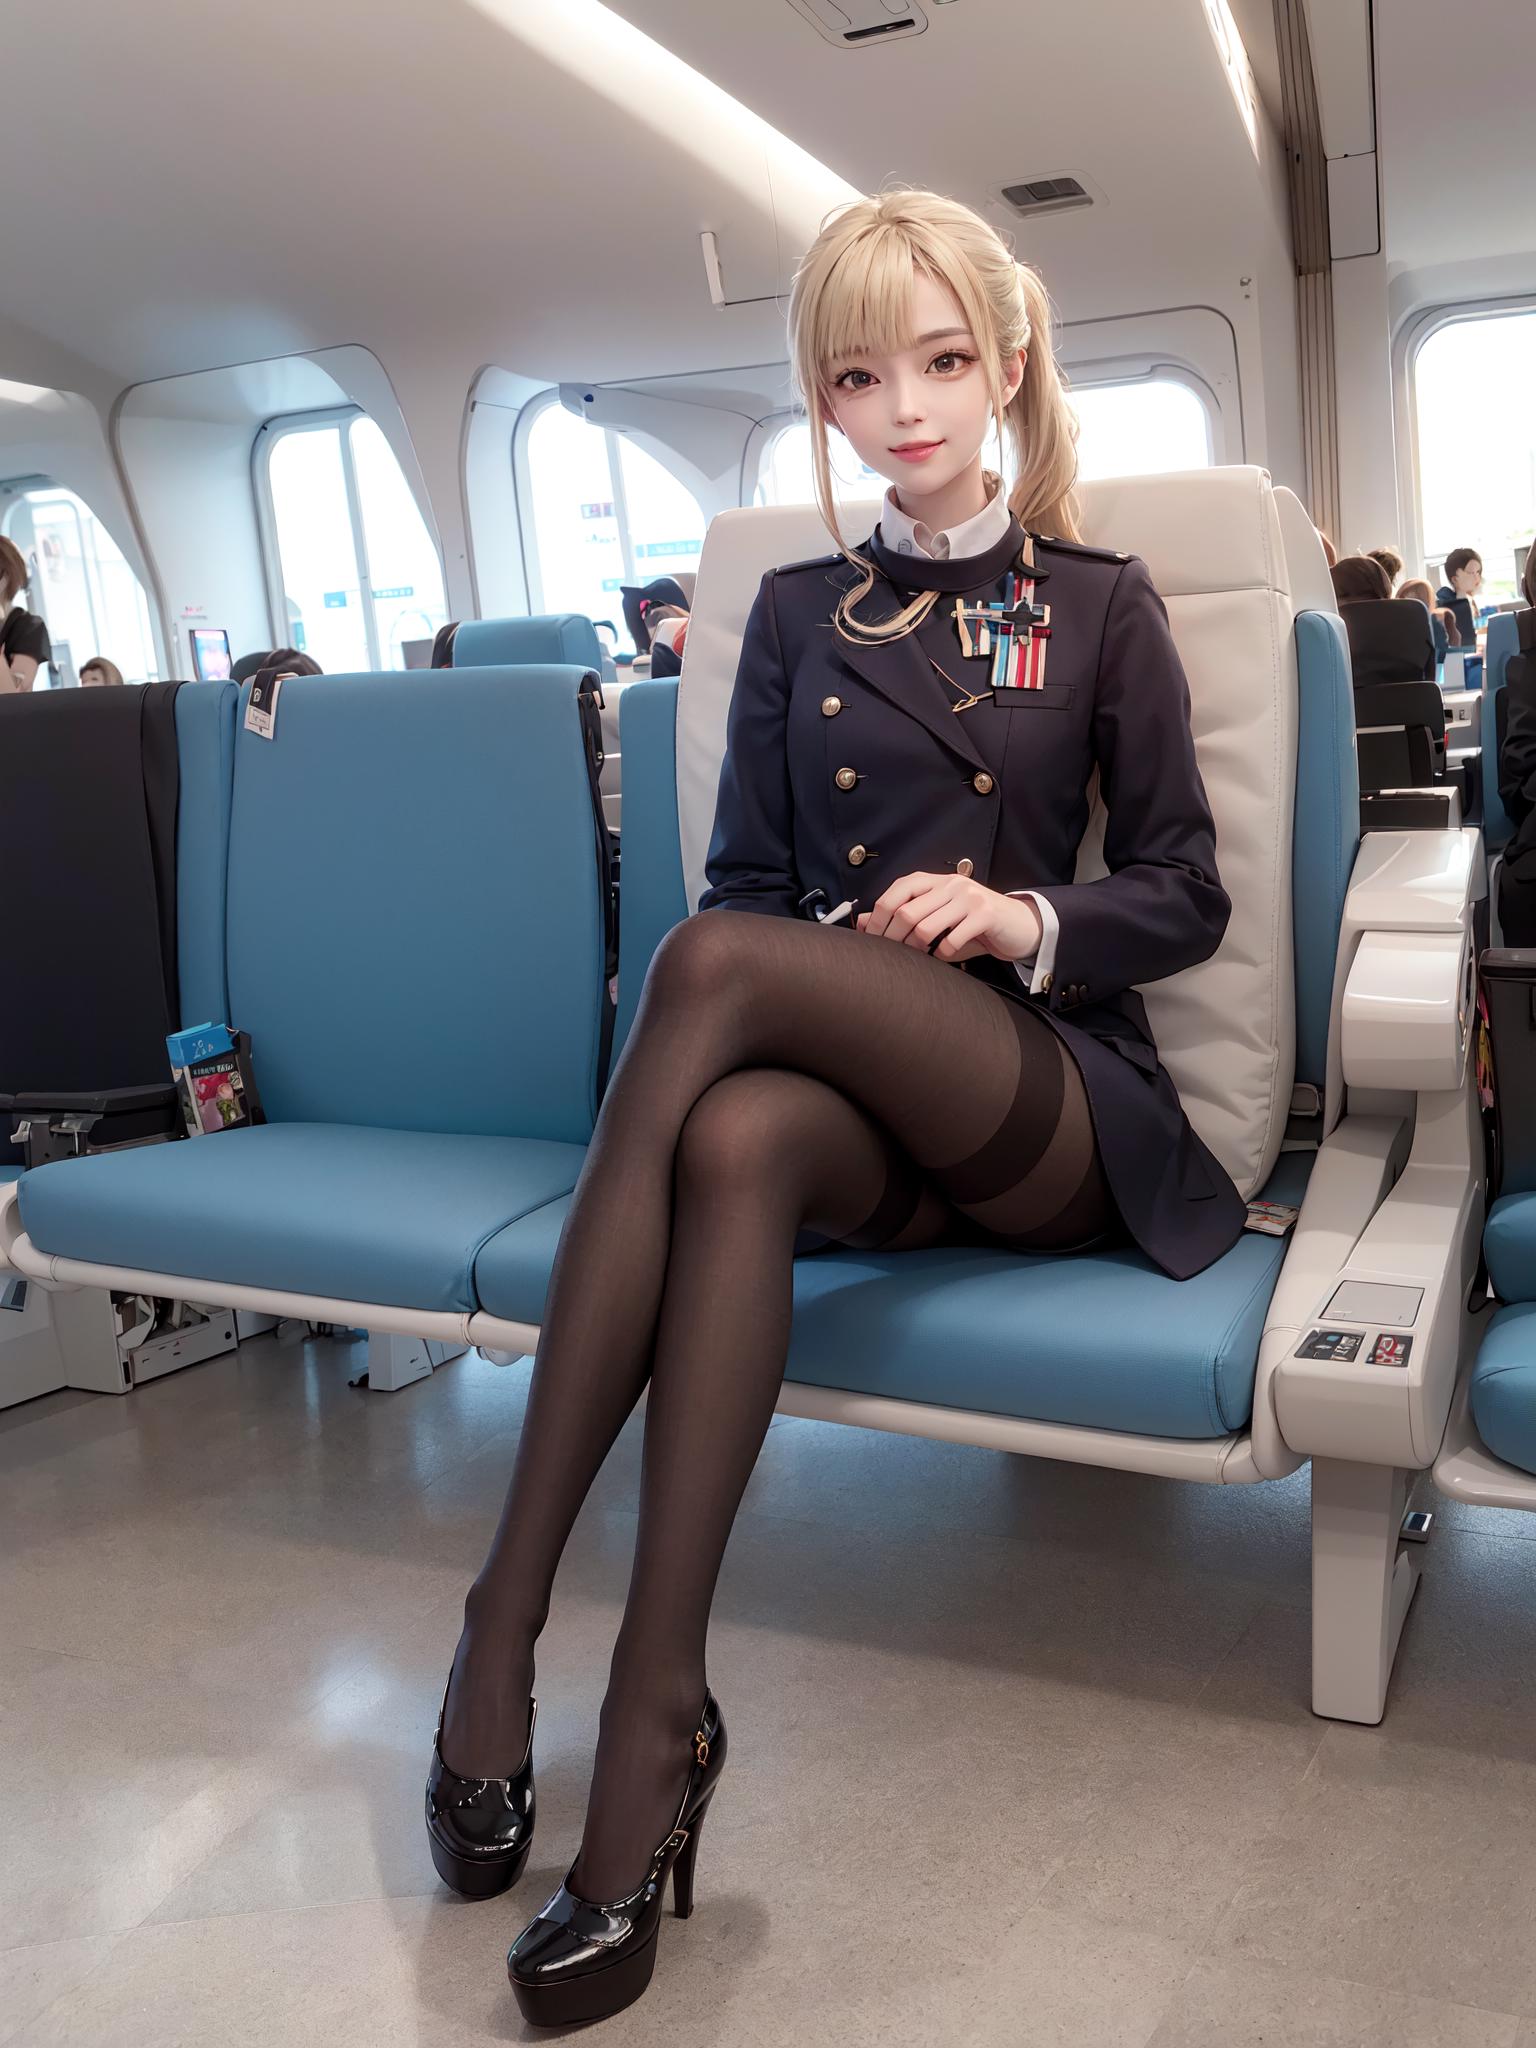 A woman in a blue dress and black stockings sitting on a blue seat.